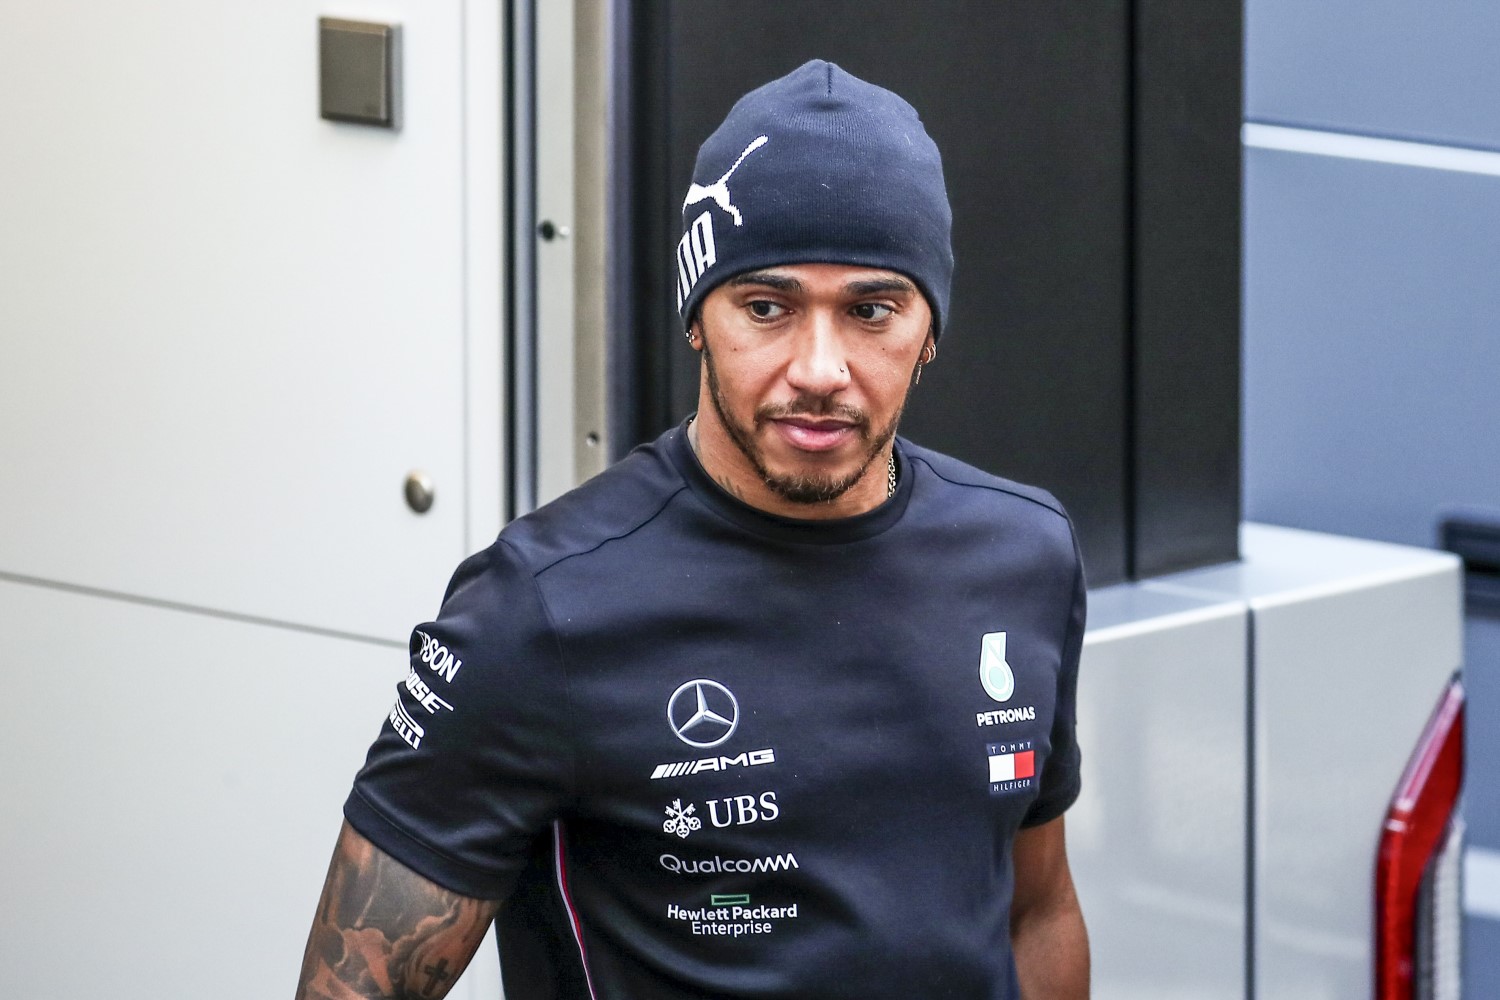 Verstappen has his sights set squarely on Hamilton